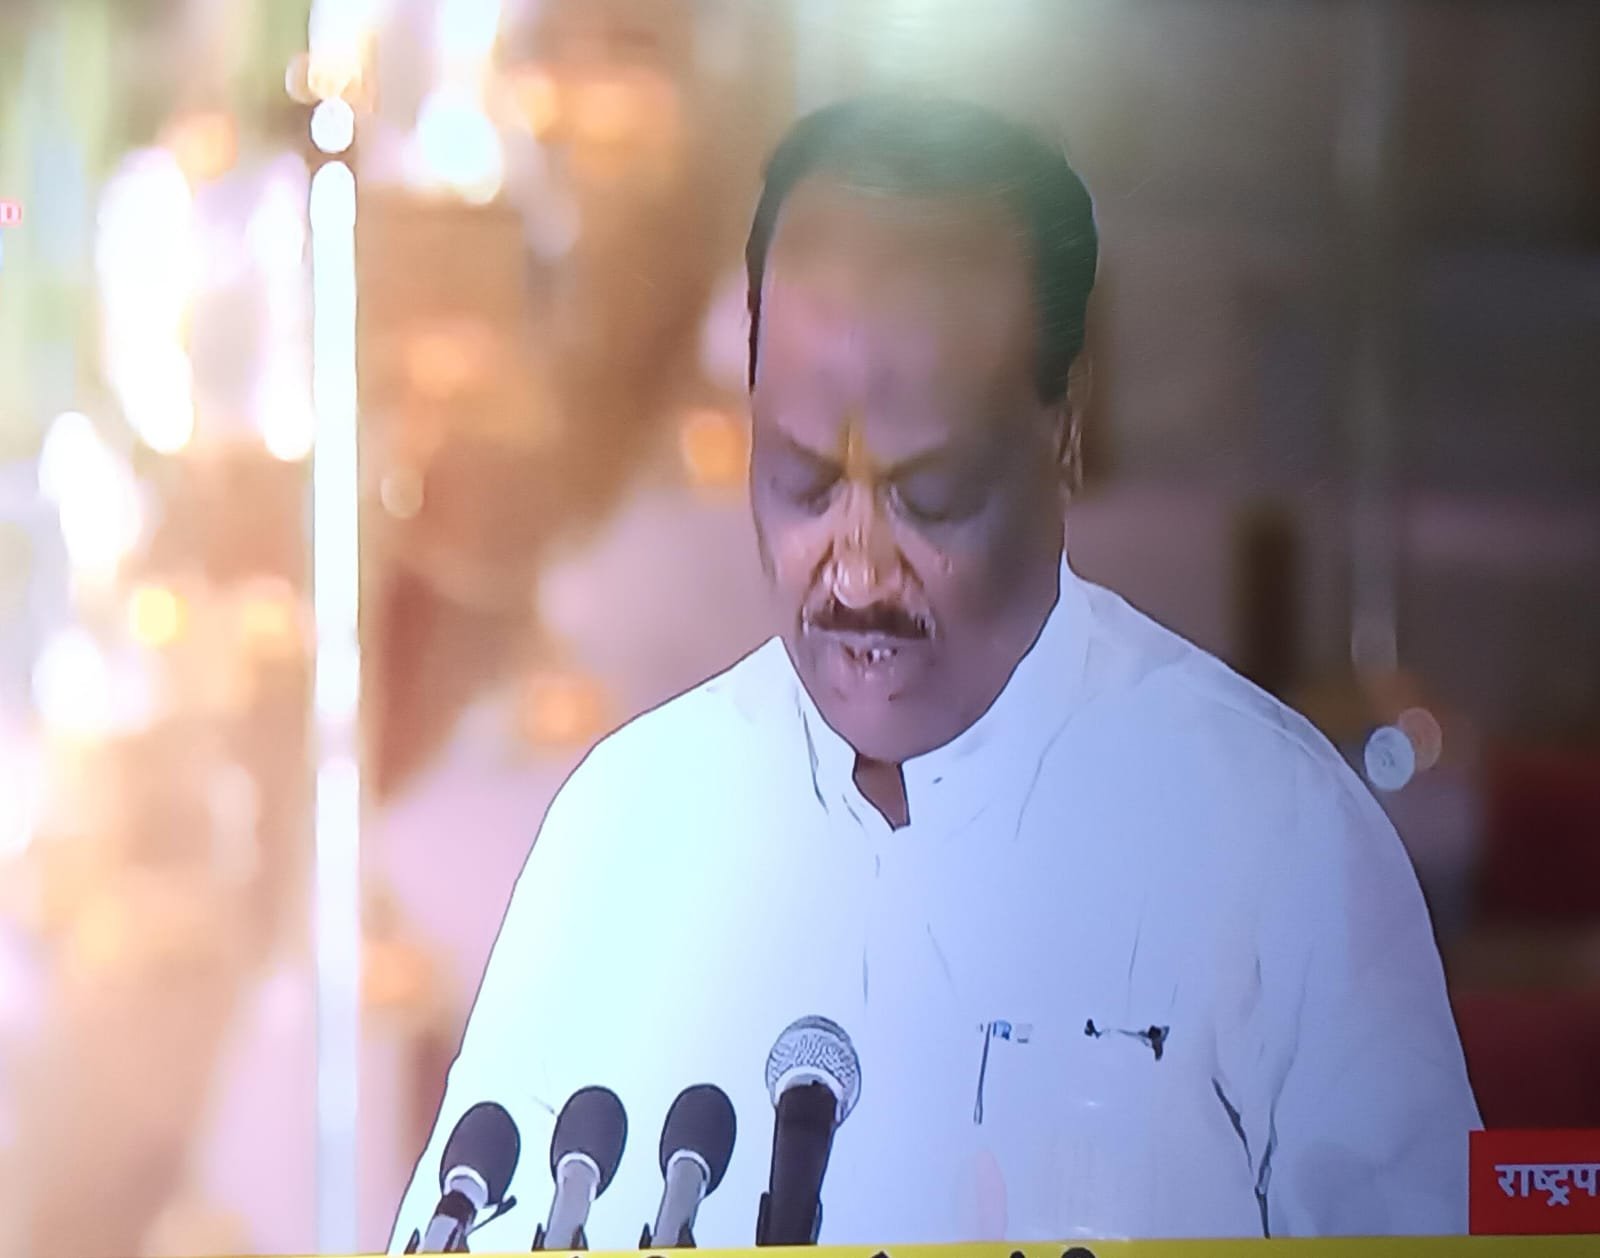 MP Durga Das Uikey: MP Durgadas Uikey becomes Union Minister of State, takes oath